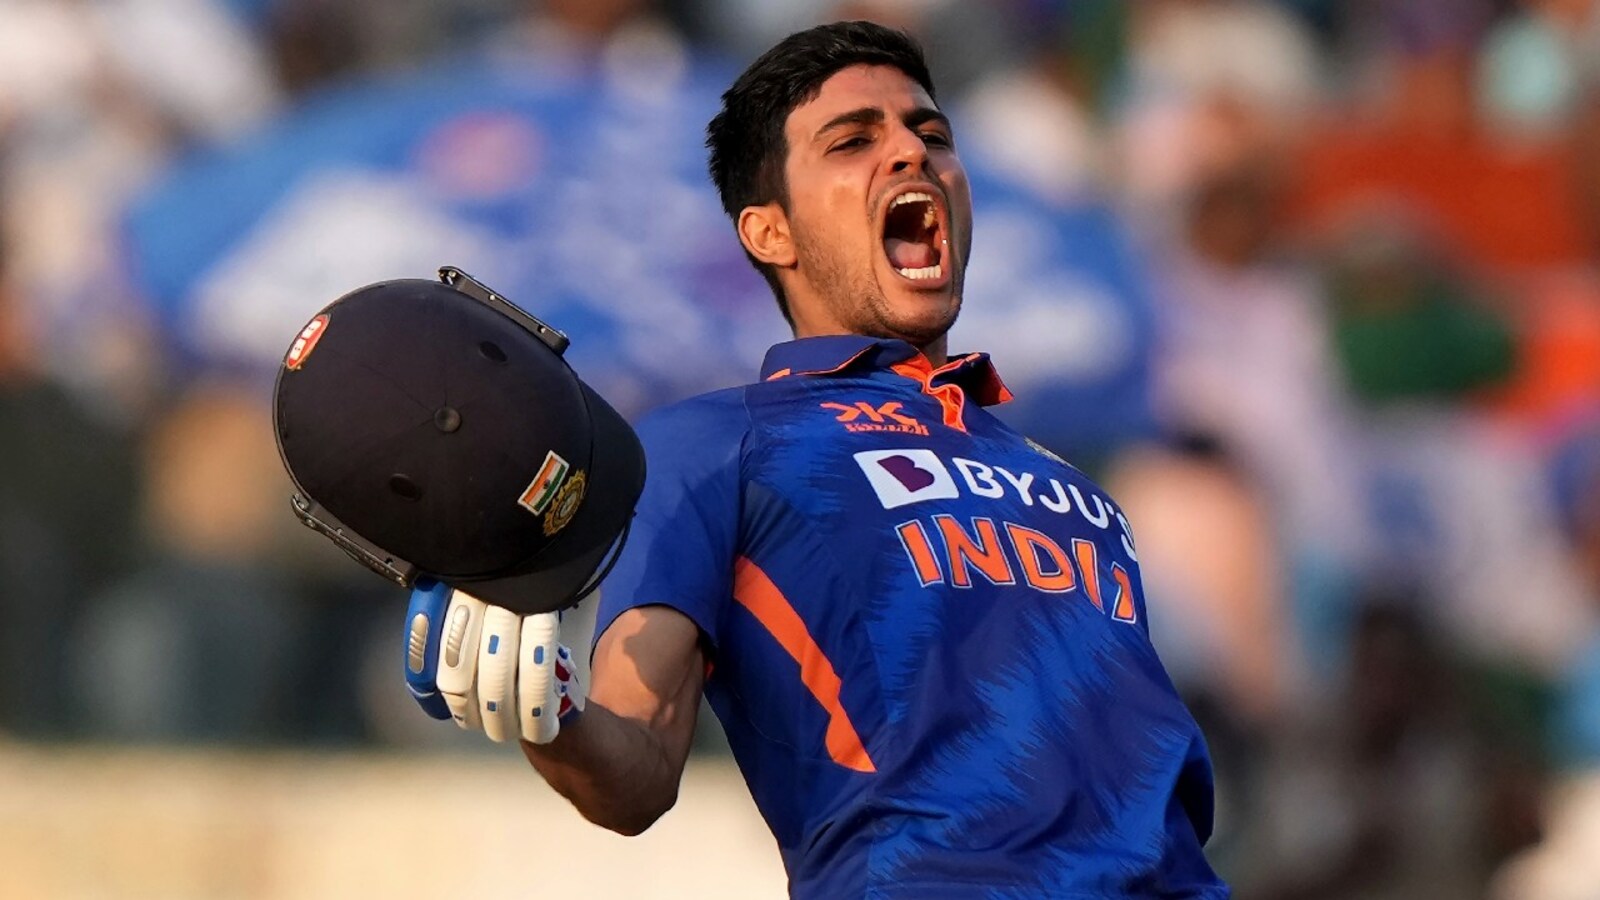 List Of The Only 6 Indian Batters To Become Number 1 In ODI Cricket